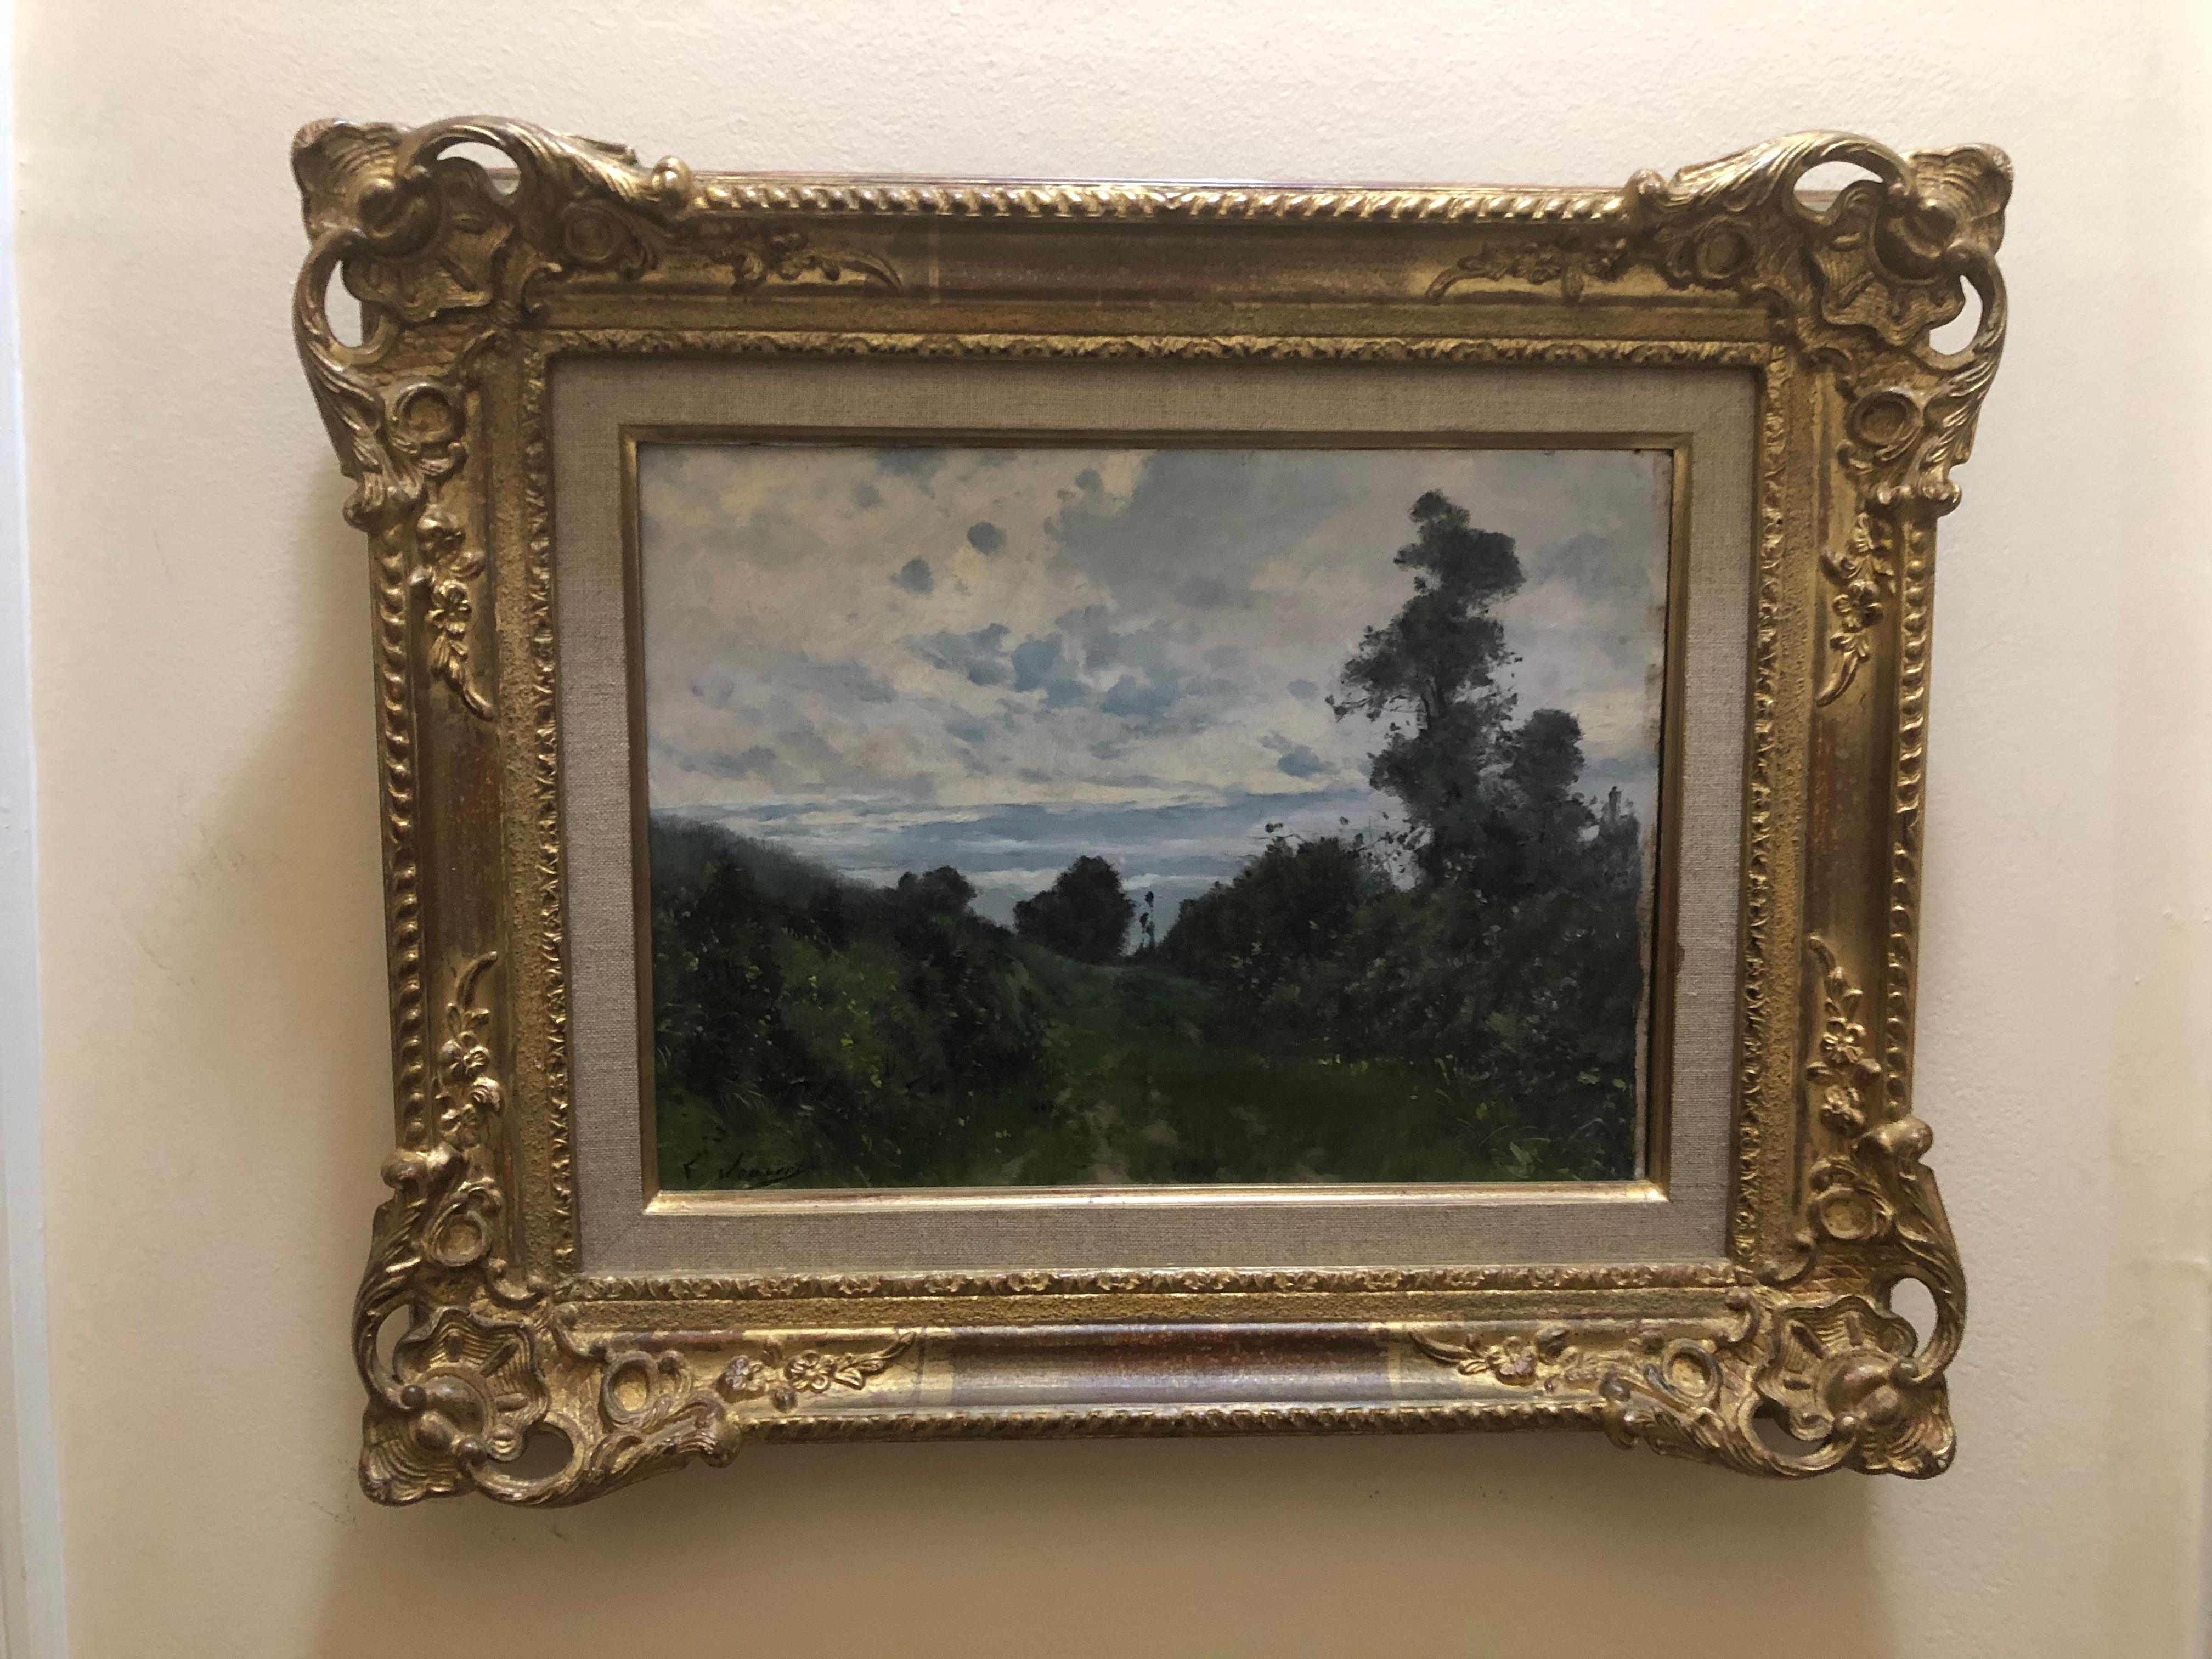 Leon Joubert: 1851-1928. Well listed French Barbizon school painter who has had auction results over $15000. This gem is an oil on panel measuring 13 3/4 inches wide by 10 1/4 inches high. The exquisite period frame measures 20” x 16”